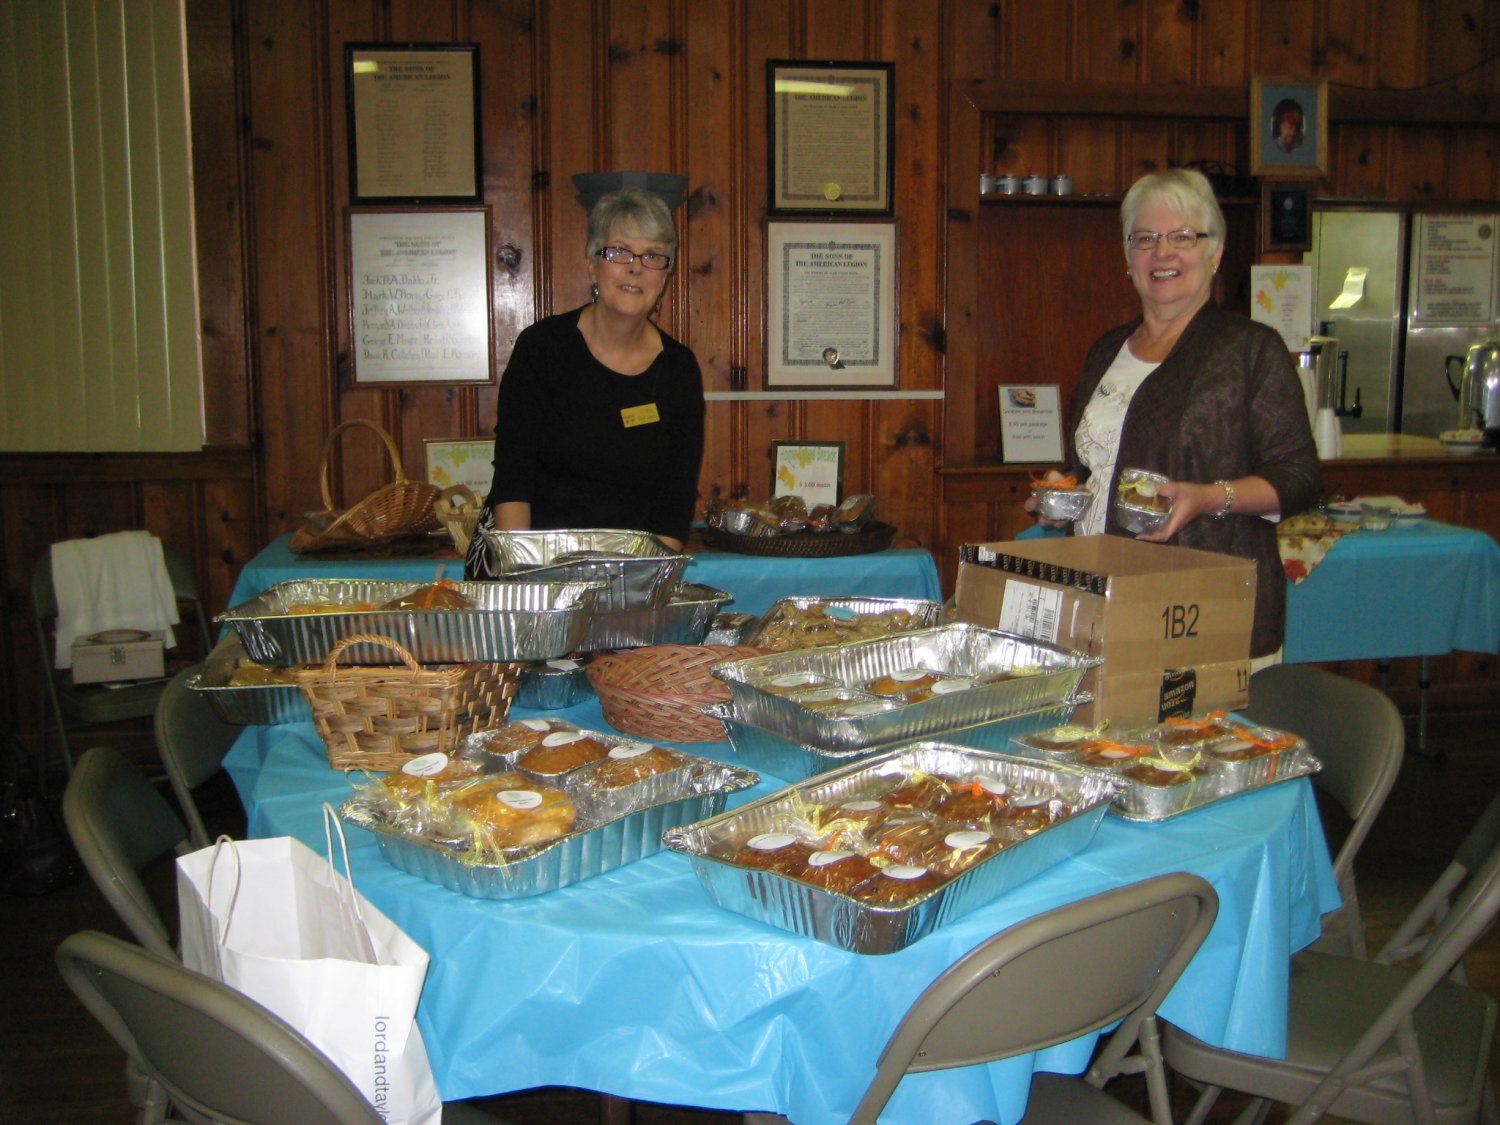  Willie DiLaura and Shirley Clark prepare mini-quick breads for sale and ready the cookies and brownies to be included in the box lunch.  